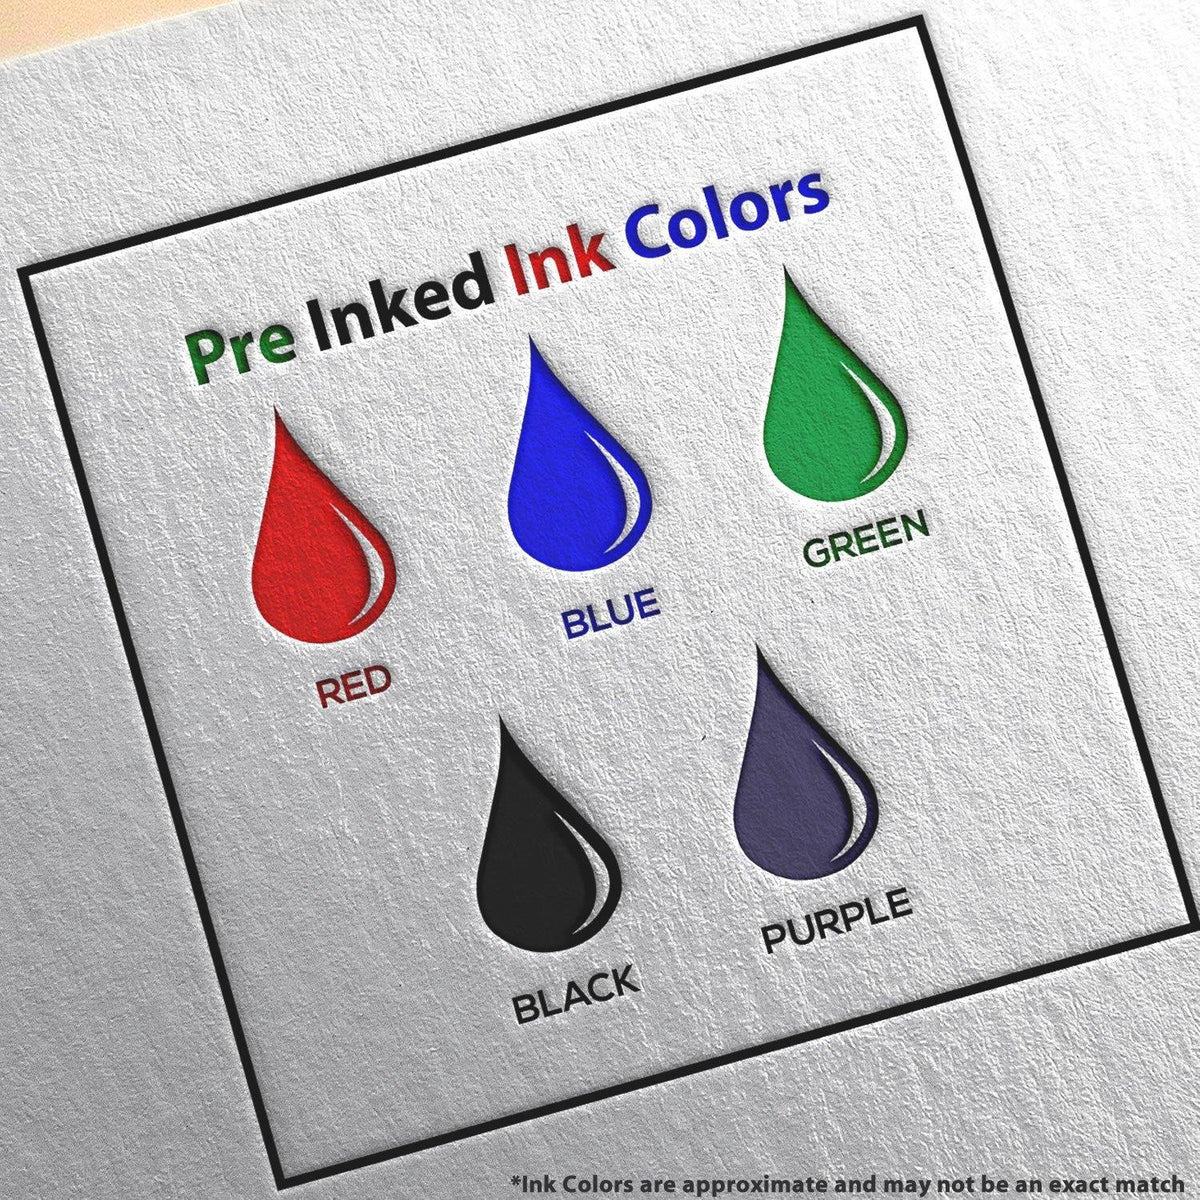 Slim Pre Inked Not Approved For Construction Stamp - Engineer Seal Stamps - Brand_Slim, Impression Size_Small, Stamp Type_Pre-Inked Stamp, Type of Use_Professional